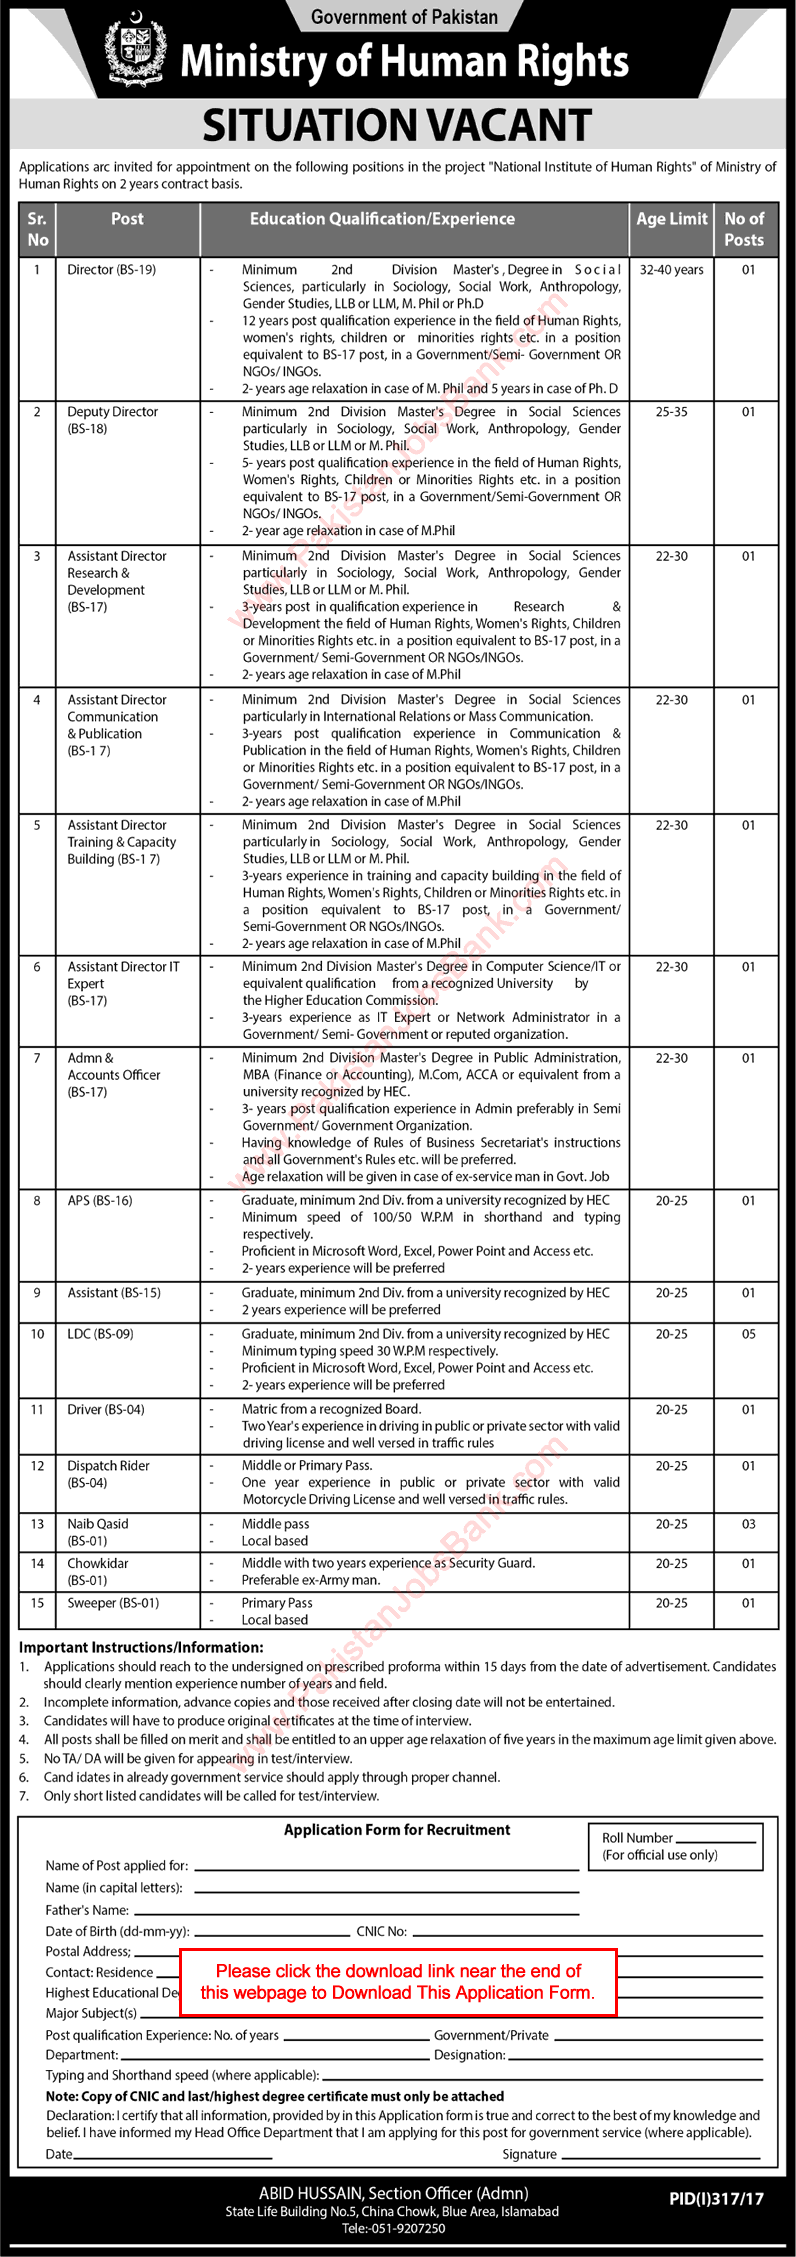 Ministry of Human Rights Jobs July 2017 Islamabad Application Form Clerks, Naib Qasid & Others Latest